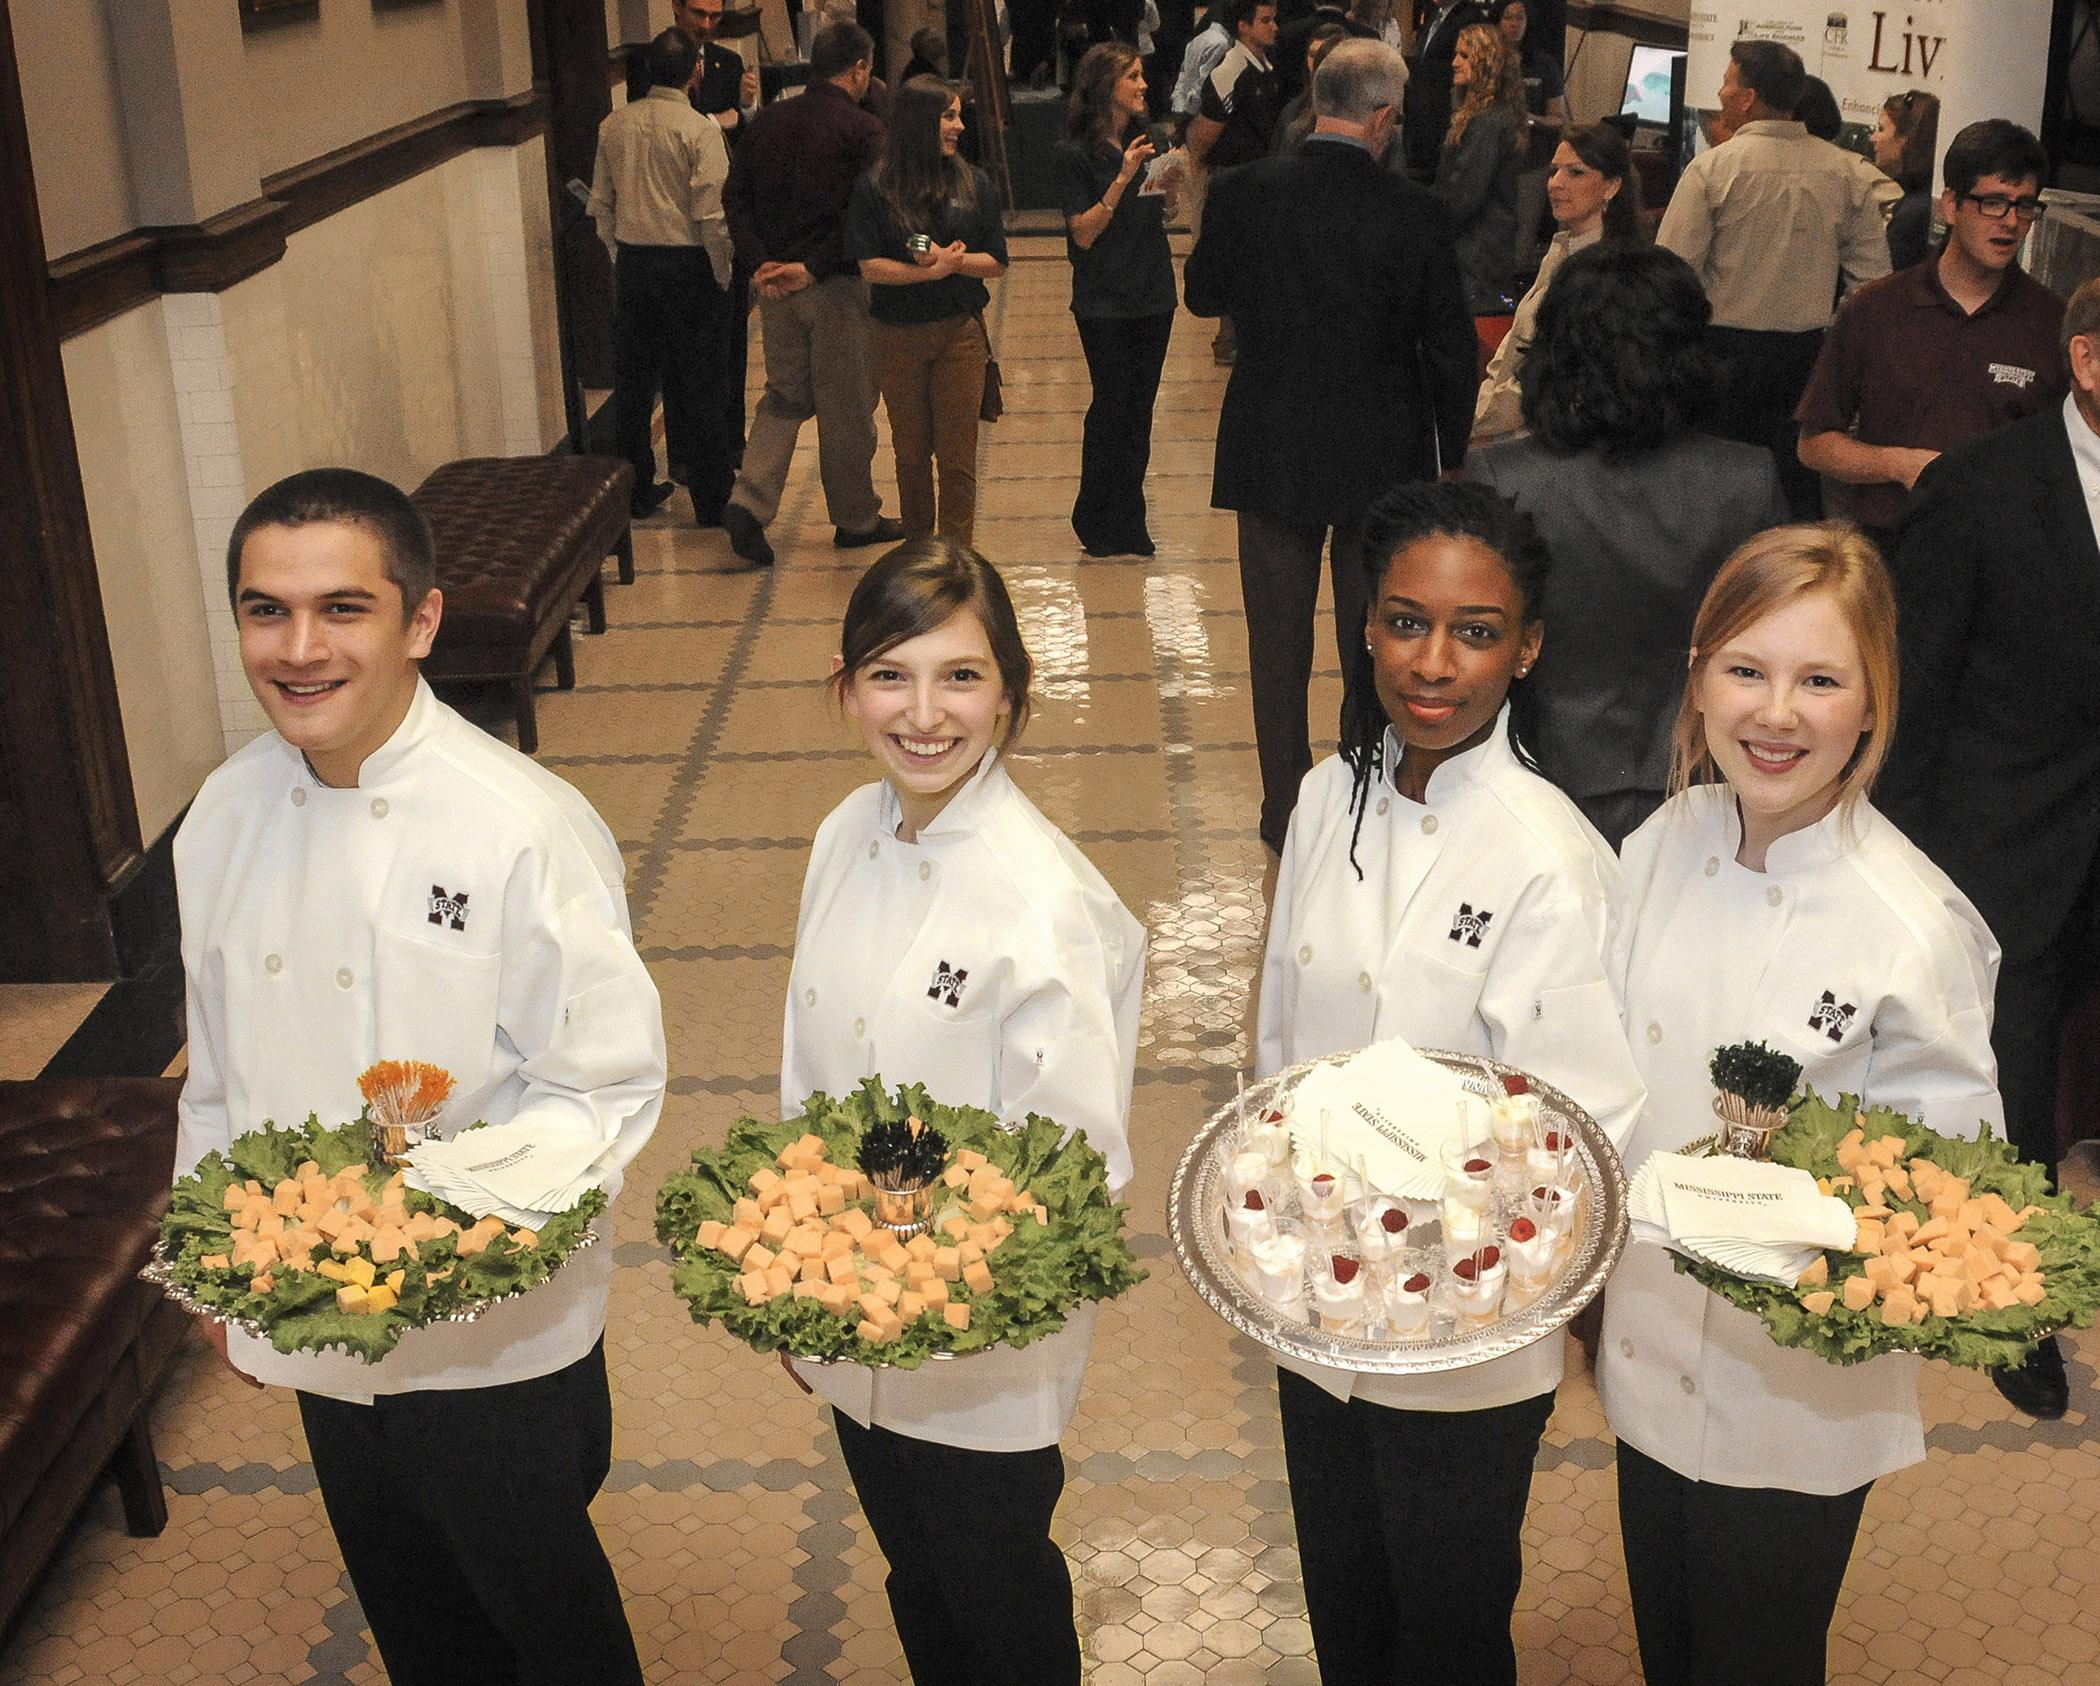 Mississippi State University food science, nutrition and health promotion students Crecencio Deleon of Hattiesburg, Anna Hansen of Long Beach, Keonshae Freeman of Biloxi and Shelly Johnston of Mount Olive serve Edam cheese and Greek yogurt March 6, 2013 at the Institutions of Higher Learning Day at the State Capitol in Jackson. (Photo by MSU Ag Communications/Scott Corey)